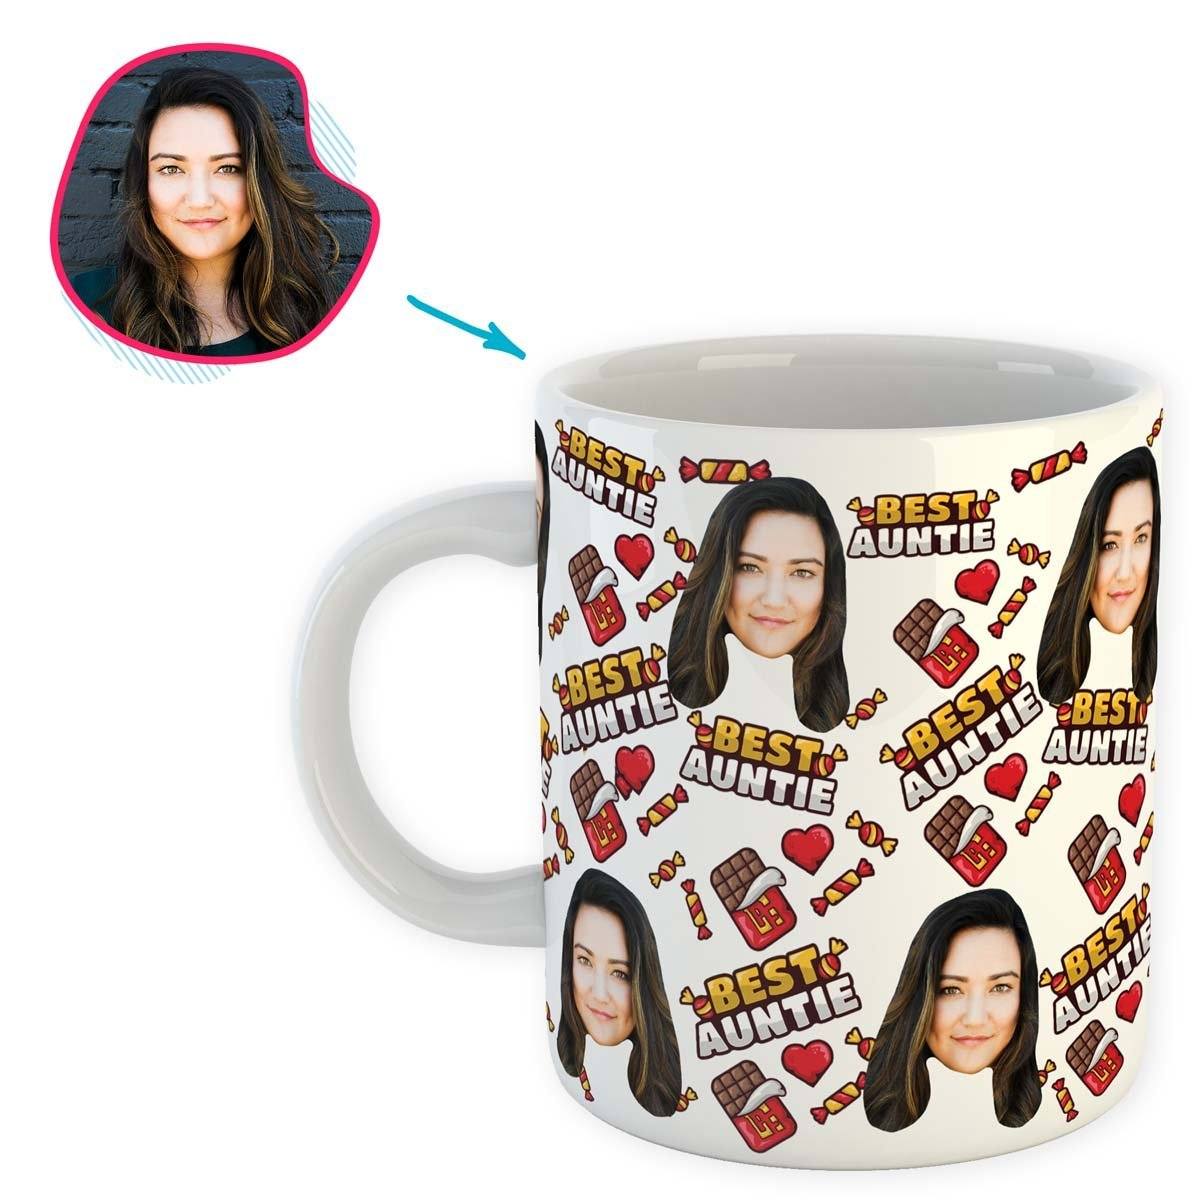 White Auntie personalized mug with photo of face printed on it